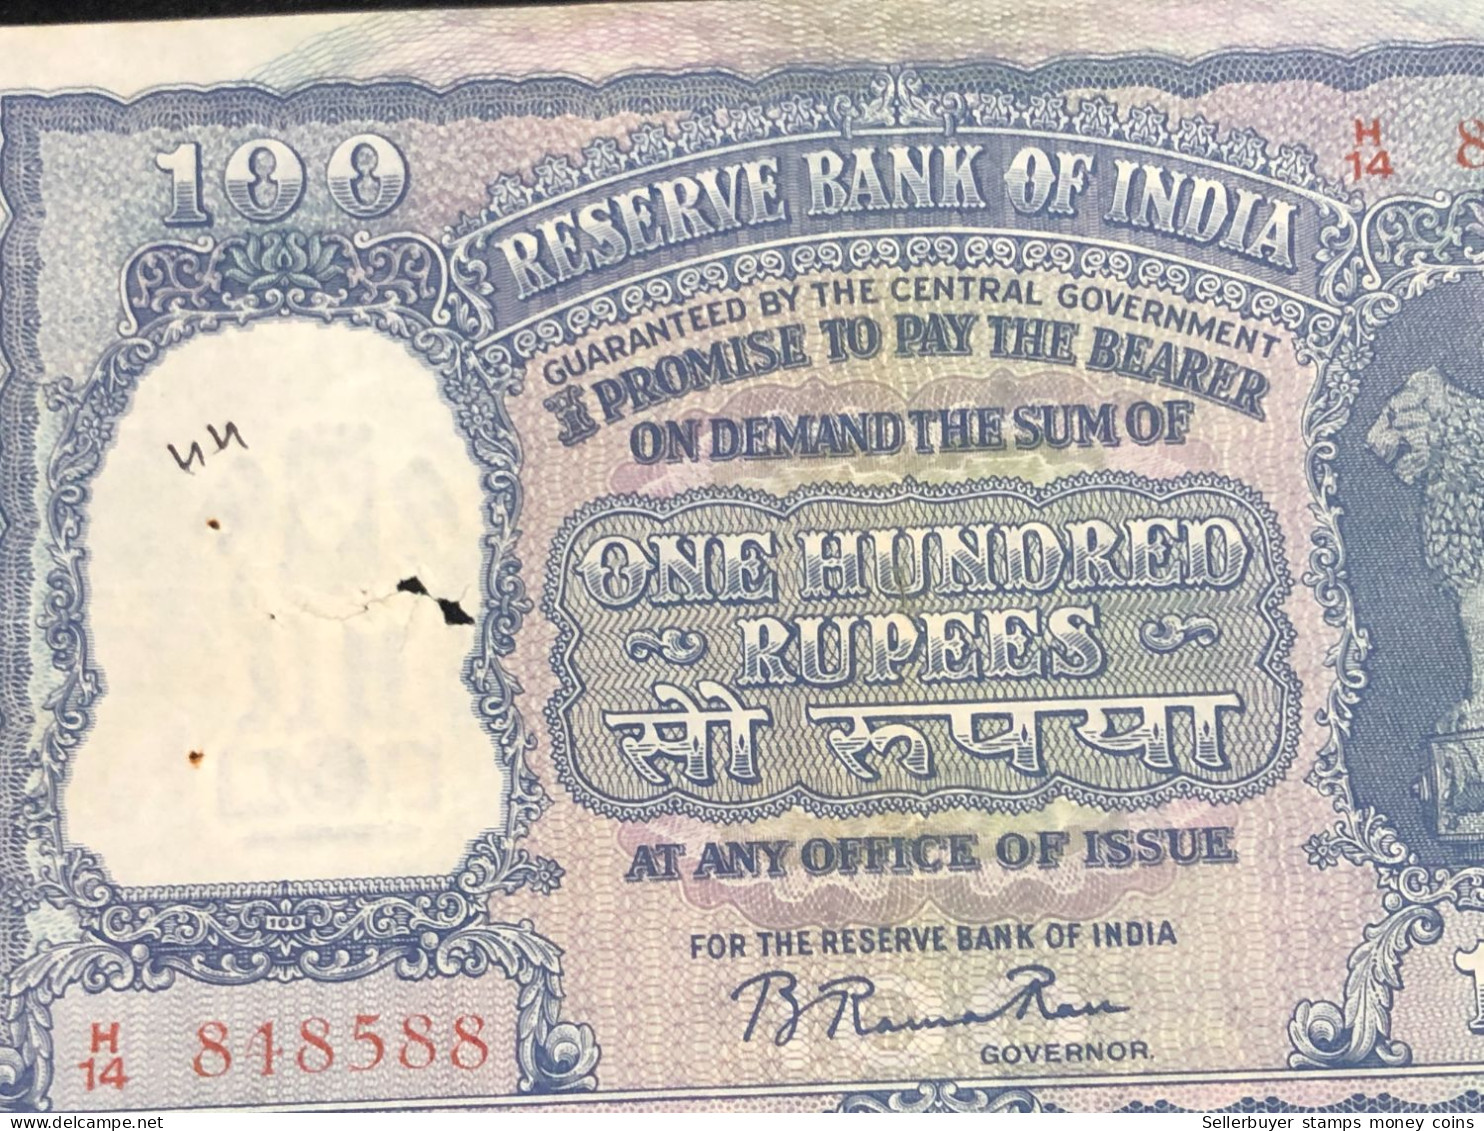 INDIA 100 RUPEES P-43  1957 TIGER ELEPHANT DAM MONEY BILL Rhas Pinhole ARE BANK NOTE Red Numbers Above And Below 1 Pcs A - Inde